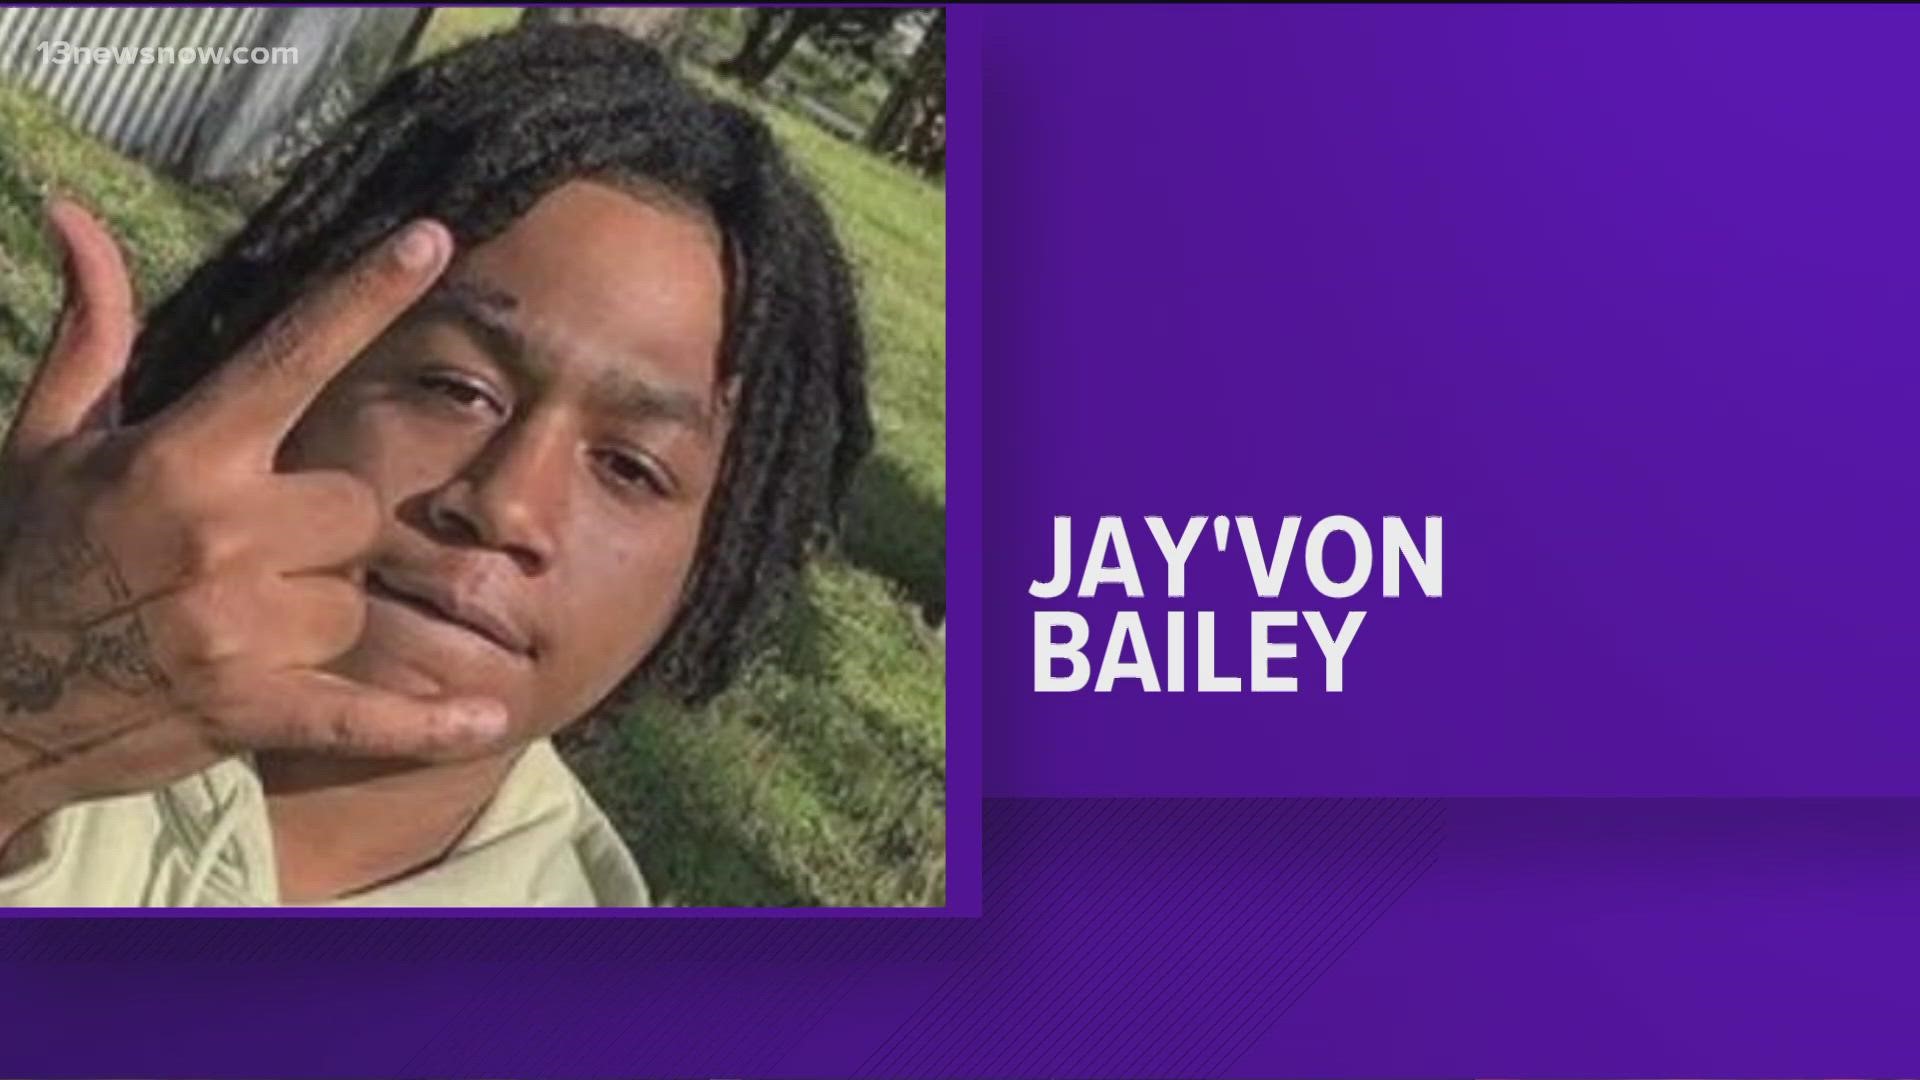 A hunter found Jay’von Bailey's remains on Jan. 9 in Painter, Virginia. He had been missing since April 2022.